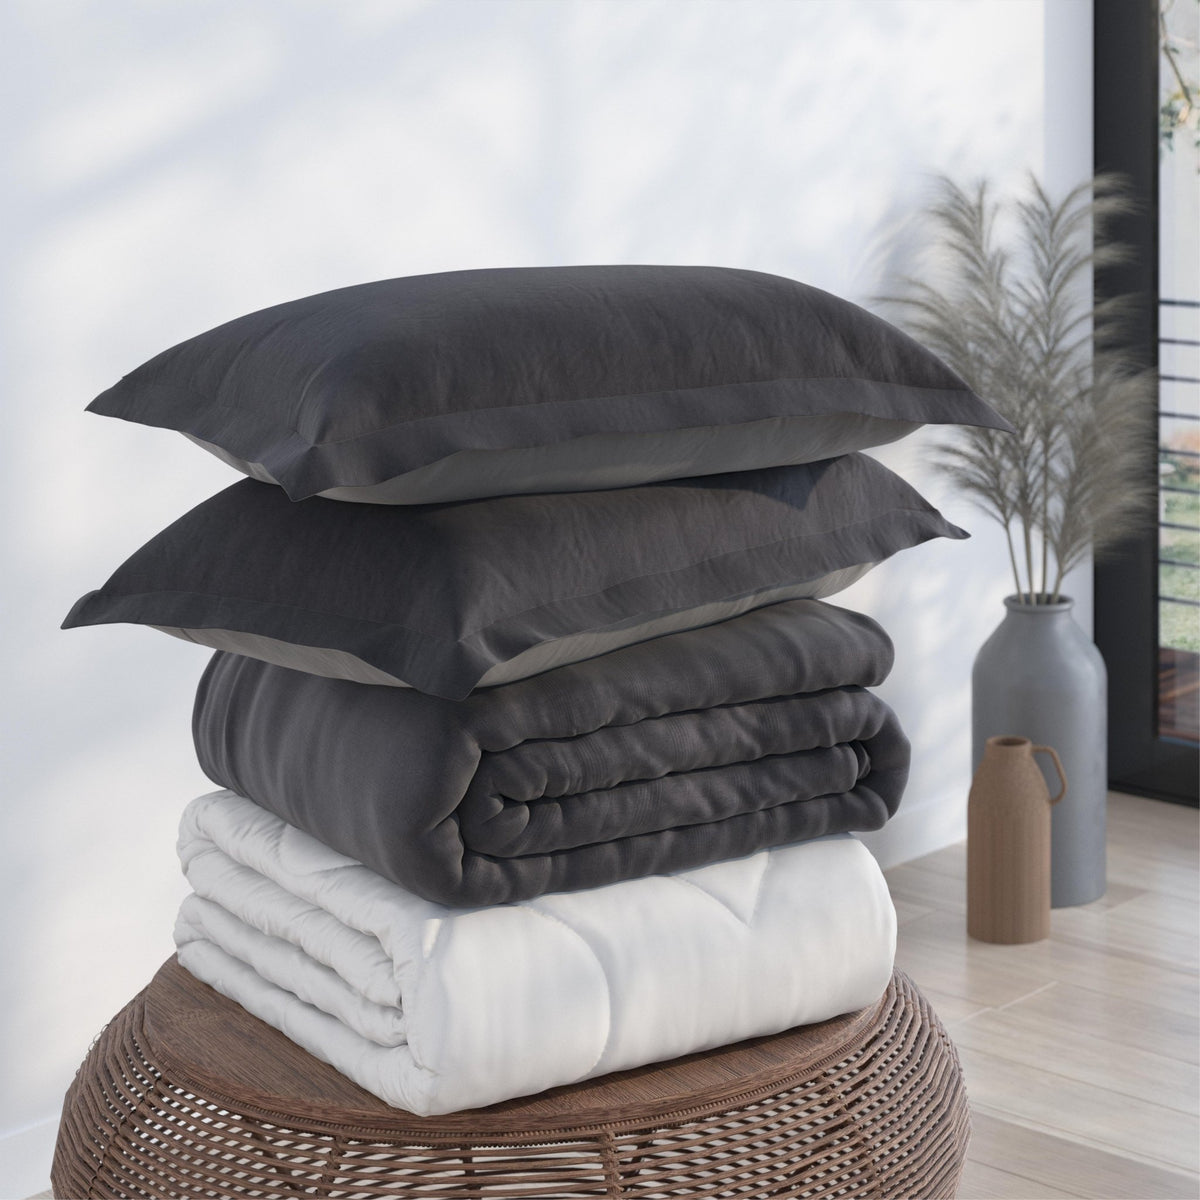 Image of a pile of bedding on top of a brown table. The bedding shown includes (from top to bottom): 2 Shadow/Dove Gray Pillow Shams with the Shadow side facing up, a neatly folded Shadow/Dove Gray Duvet Cover + Cooling with the Shadow side showing, and a neatly folded Cooling Duvet Insert 